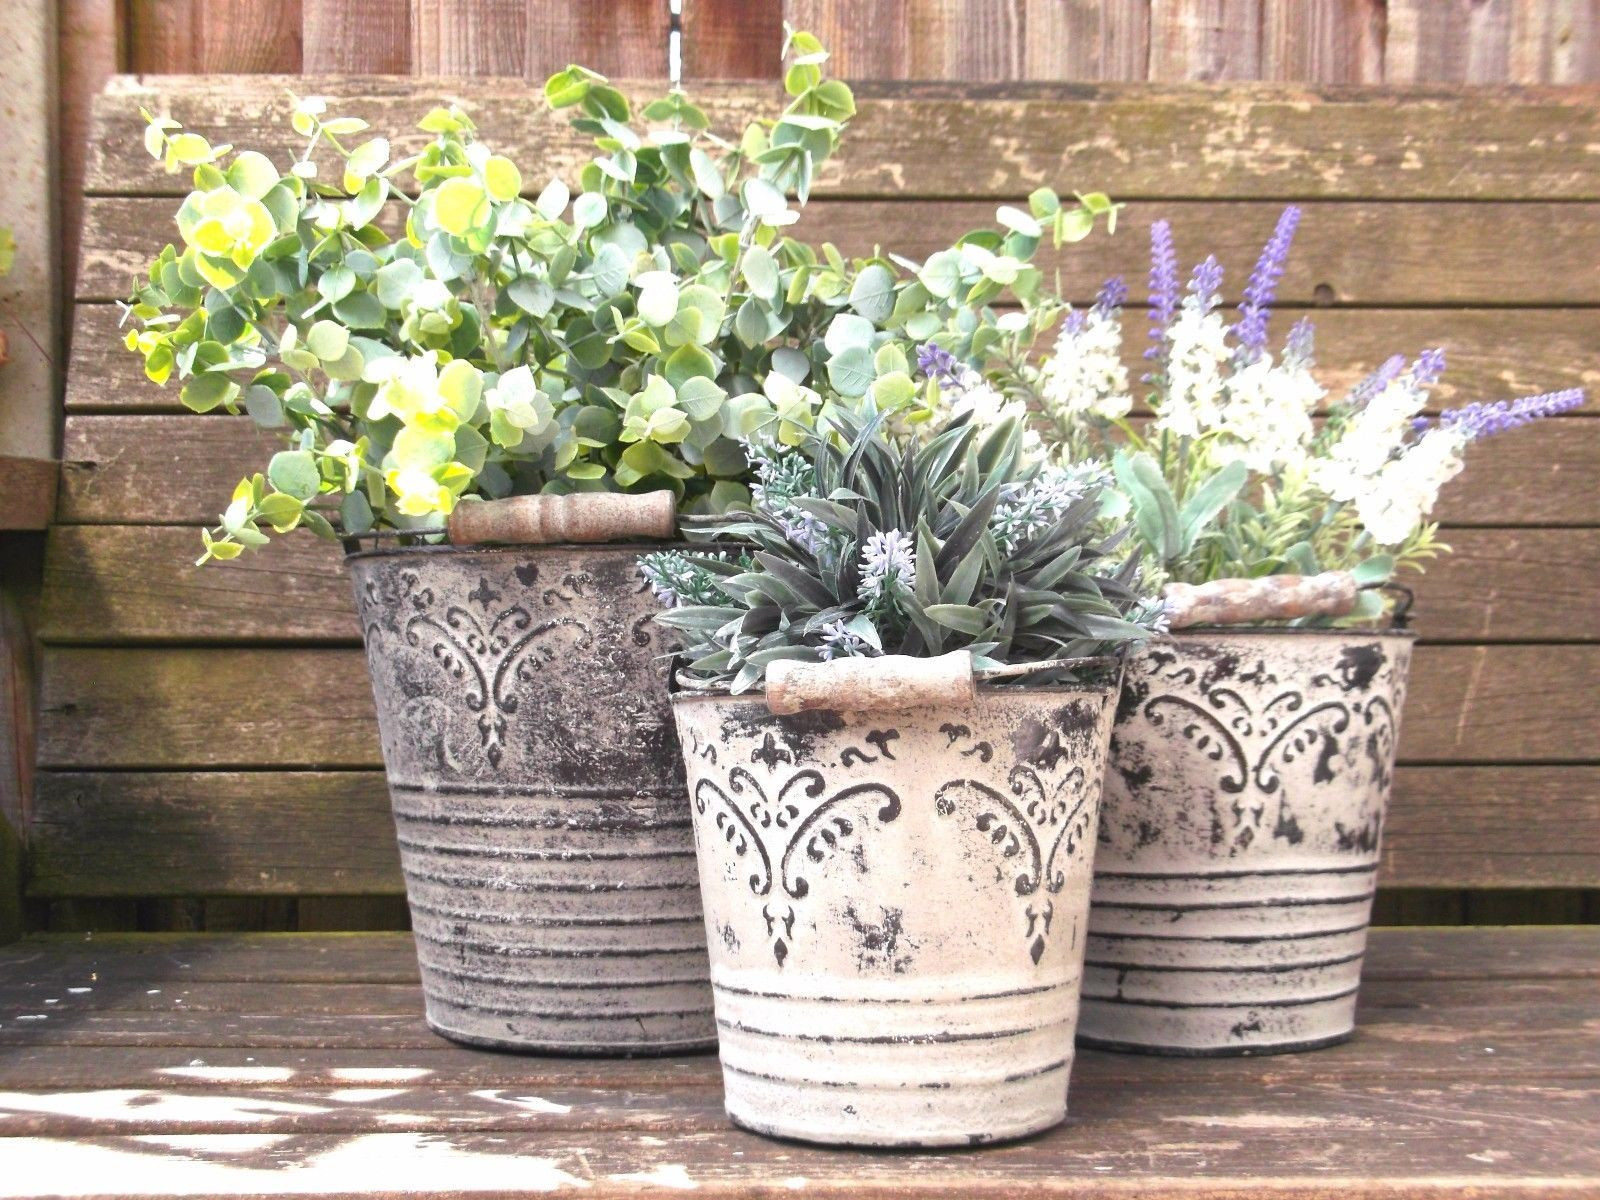 19 Recommended Rustic Metal Flower Vase 2024 free download rustic metal flower vase of french vintage style set of 3 metal garden planters containers regarding french vintage style set of 3 metal garden planters containers flower pots vases